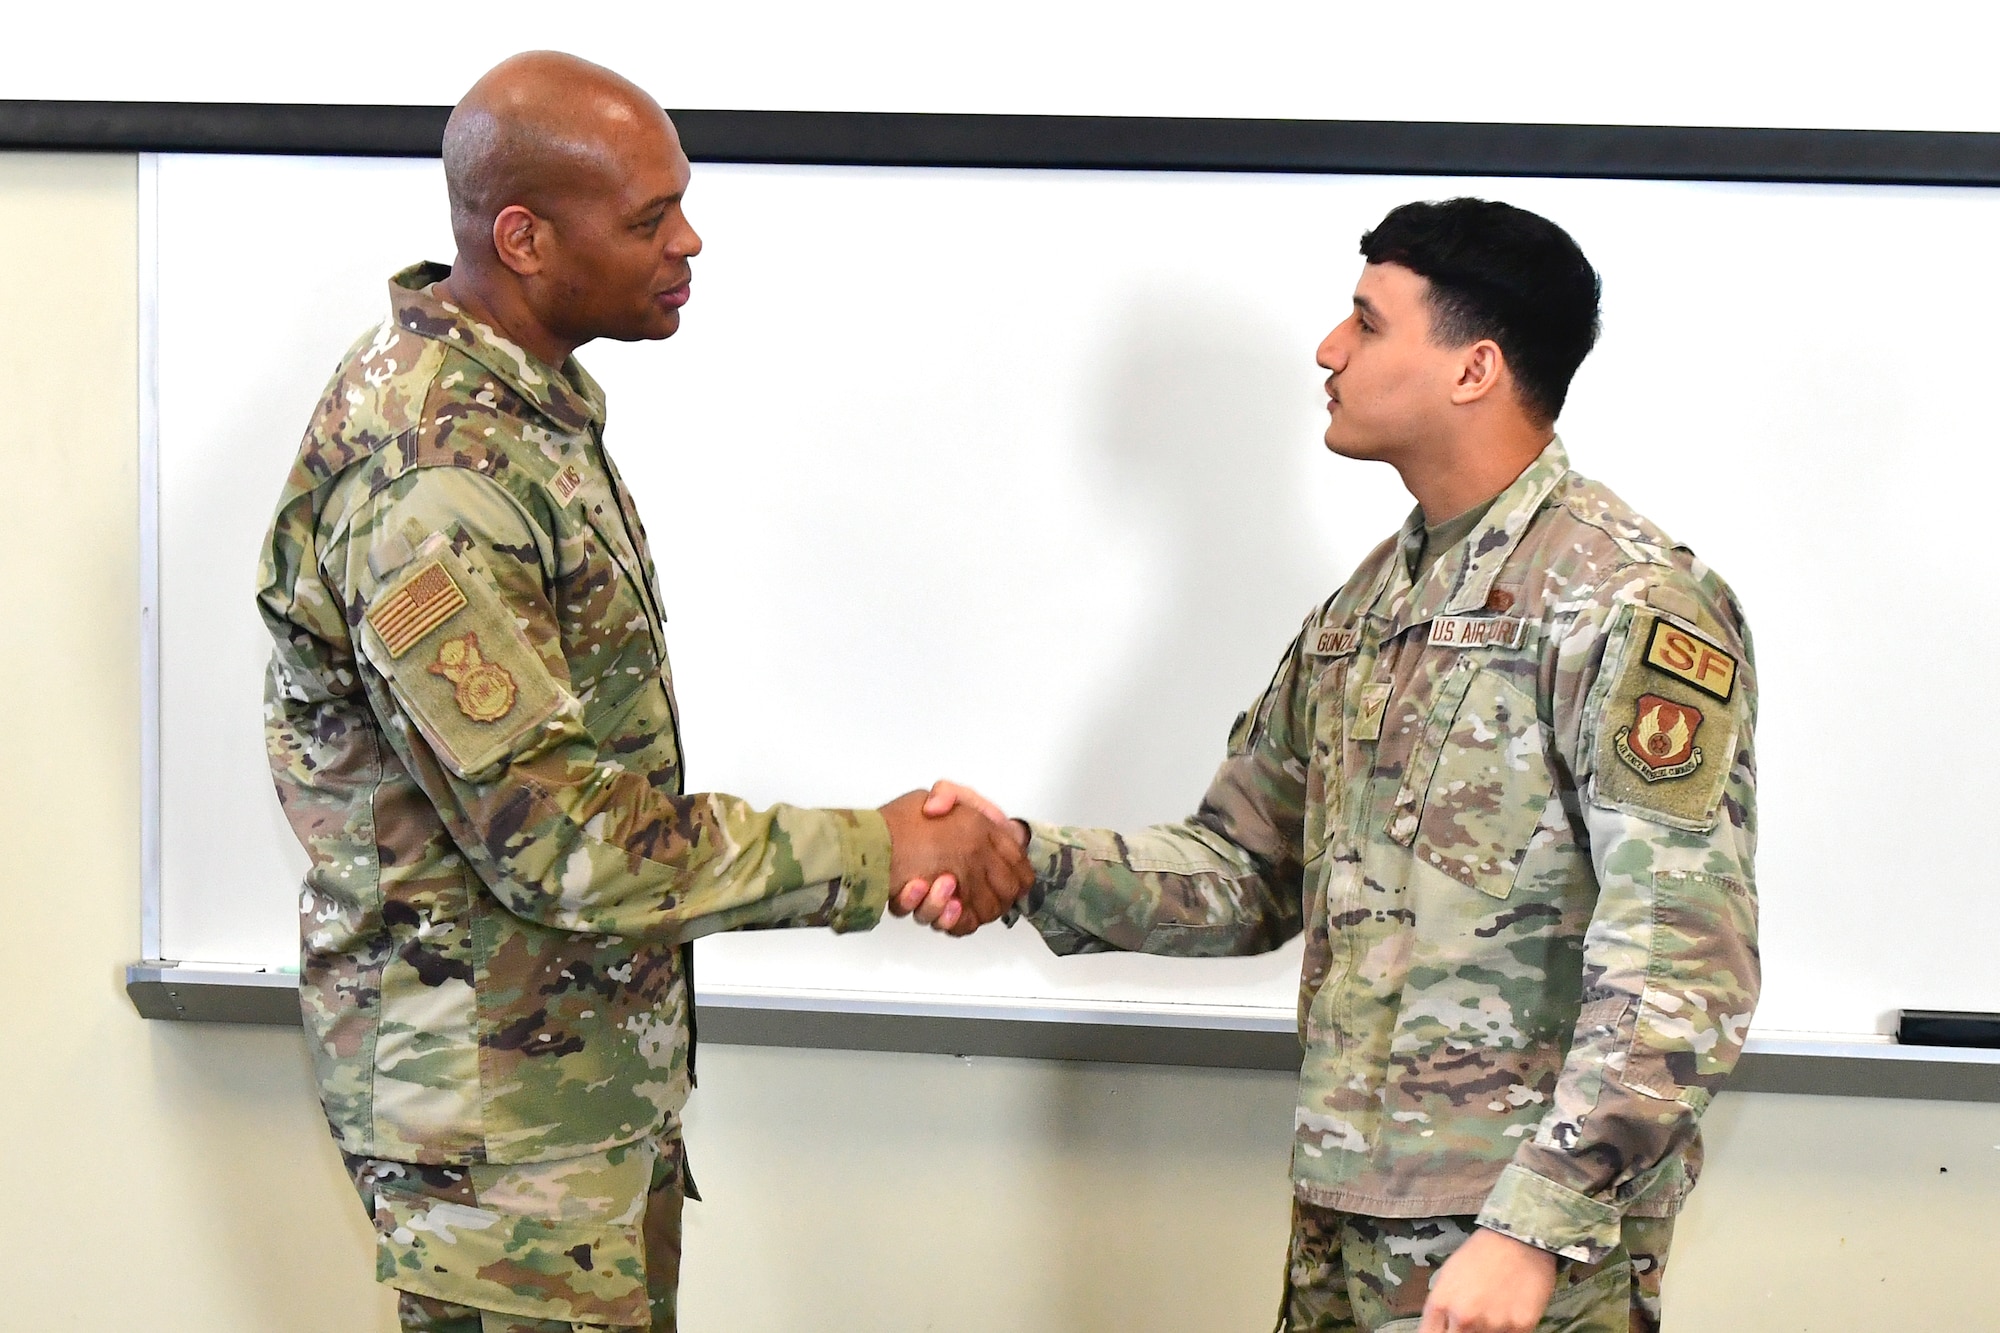 Brig. Gen. Roy Collins, Headquarters Air Force Security Forces director, shakes hands with Senior Airman William Gonzalez.